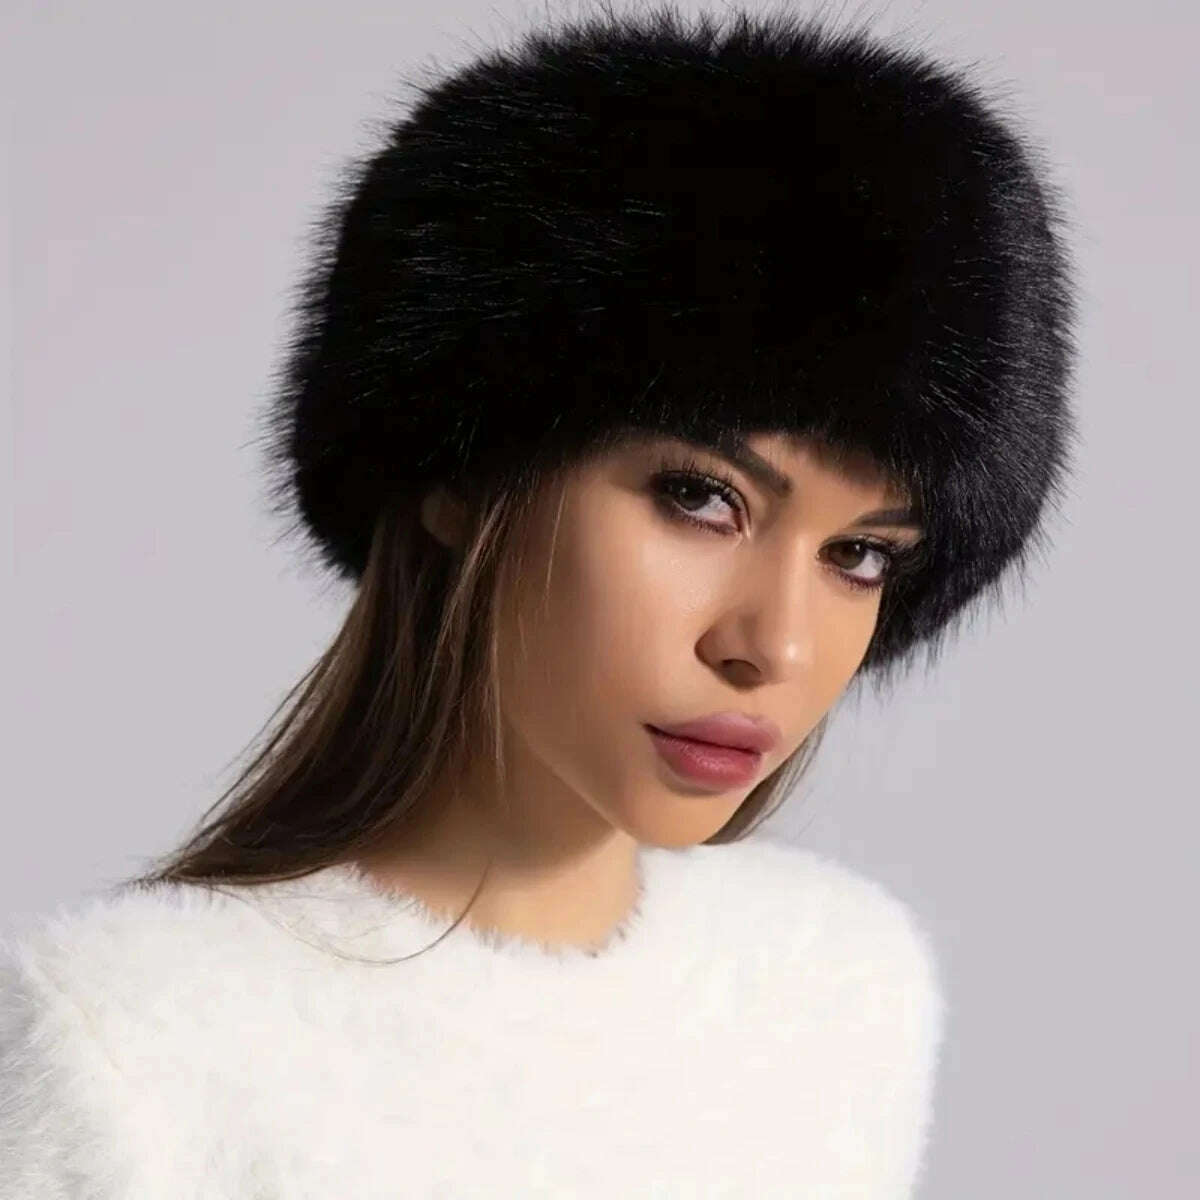 KIMLUD, Winter lmitation Fur Thickened Hat Without Top Hat, BreathableComfortable Outdoor Travel Brimless Hat, KIMLUD Womens Clothes